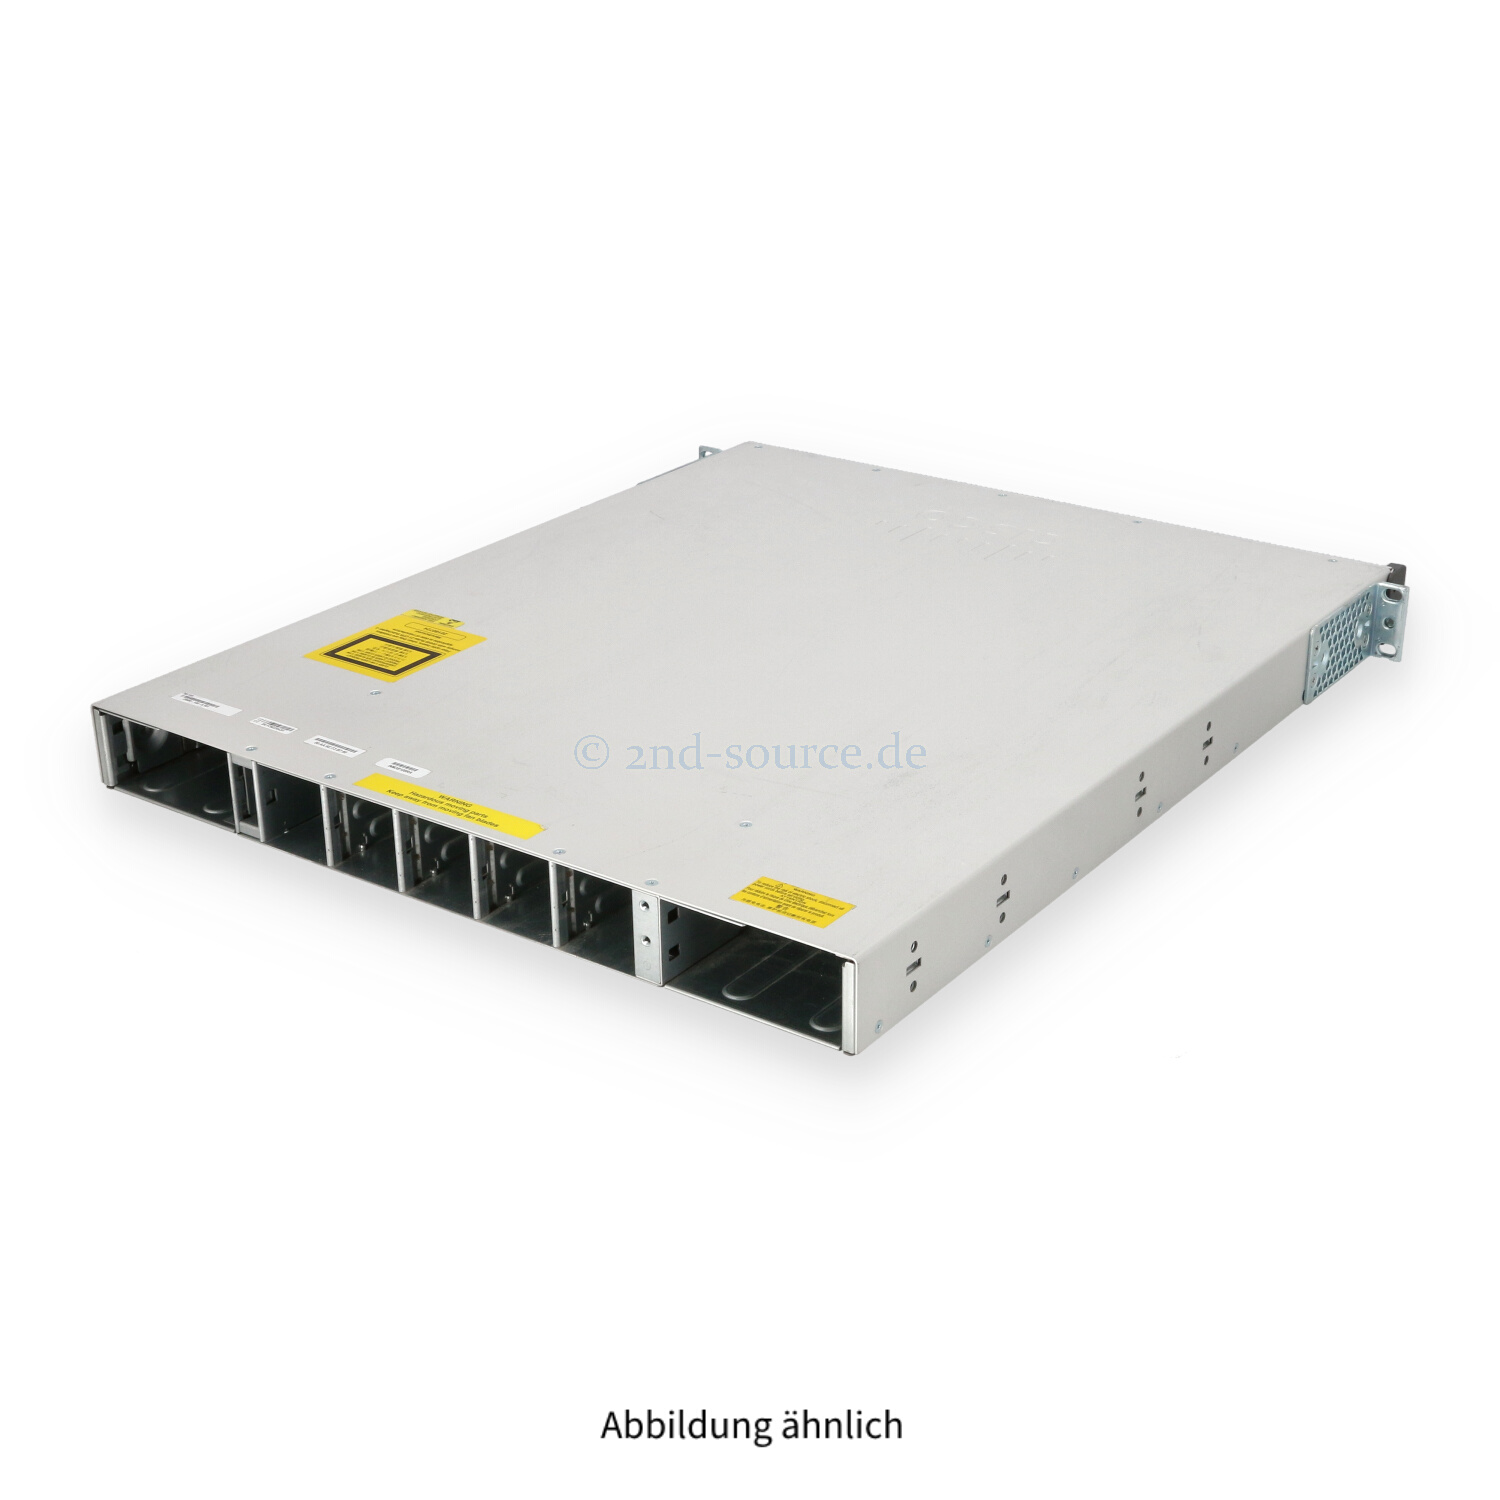 Cisco Catalyst 9500 12x QSFP+ 40GbE Managed Switch Chassis C9500-12Q-A